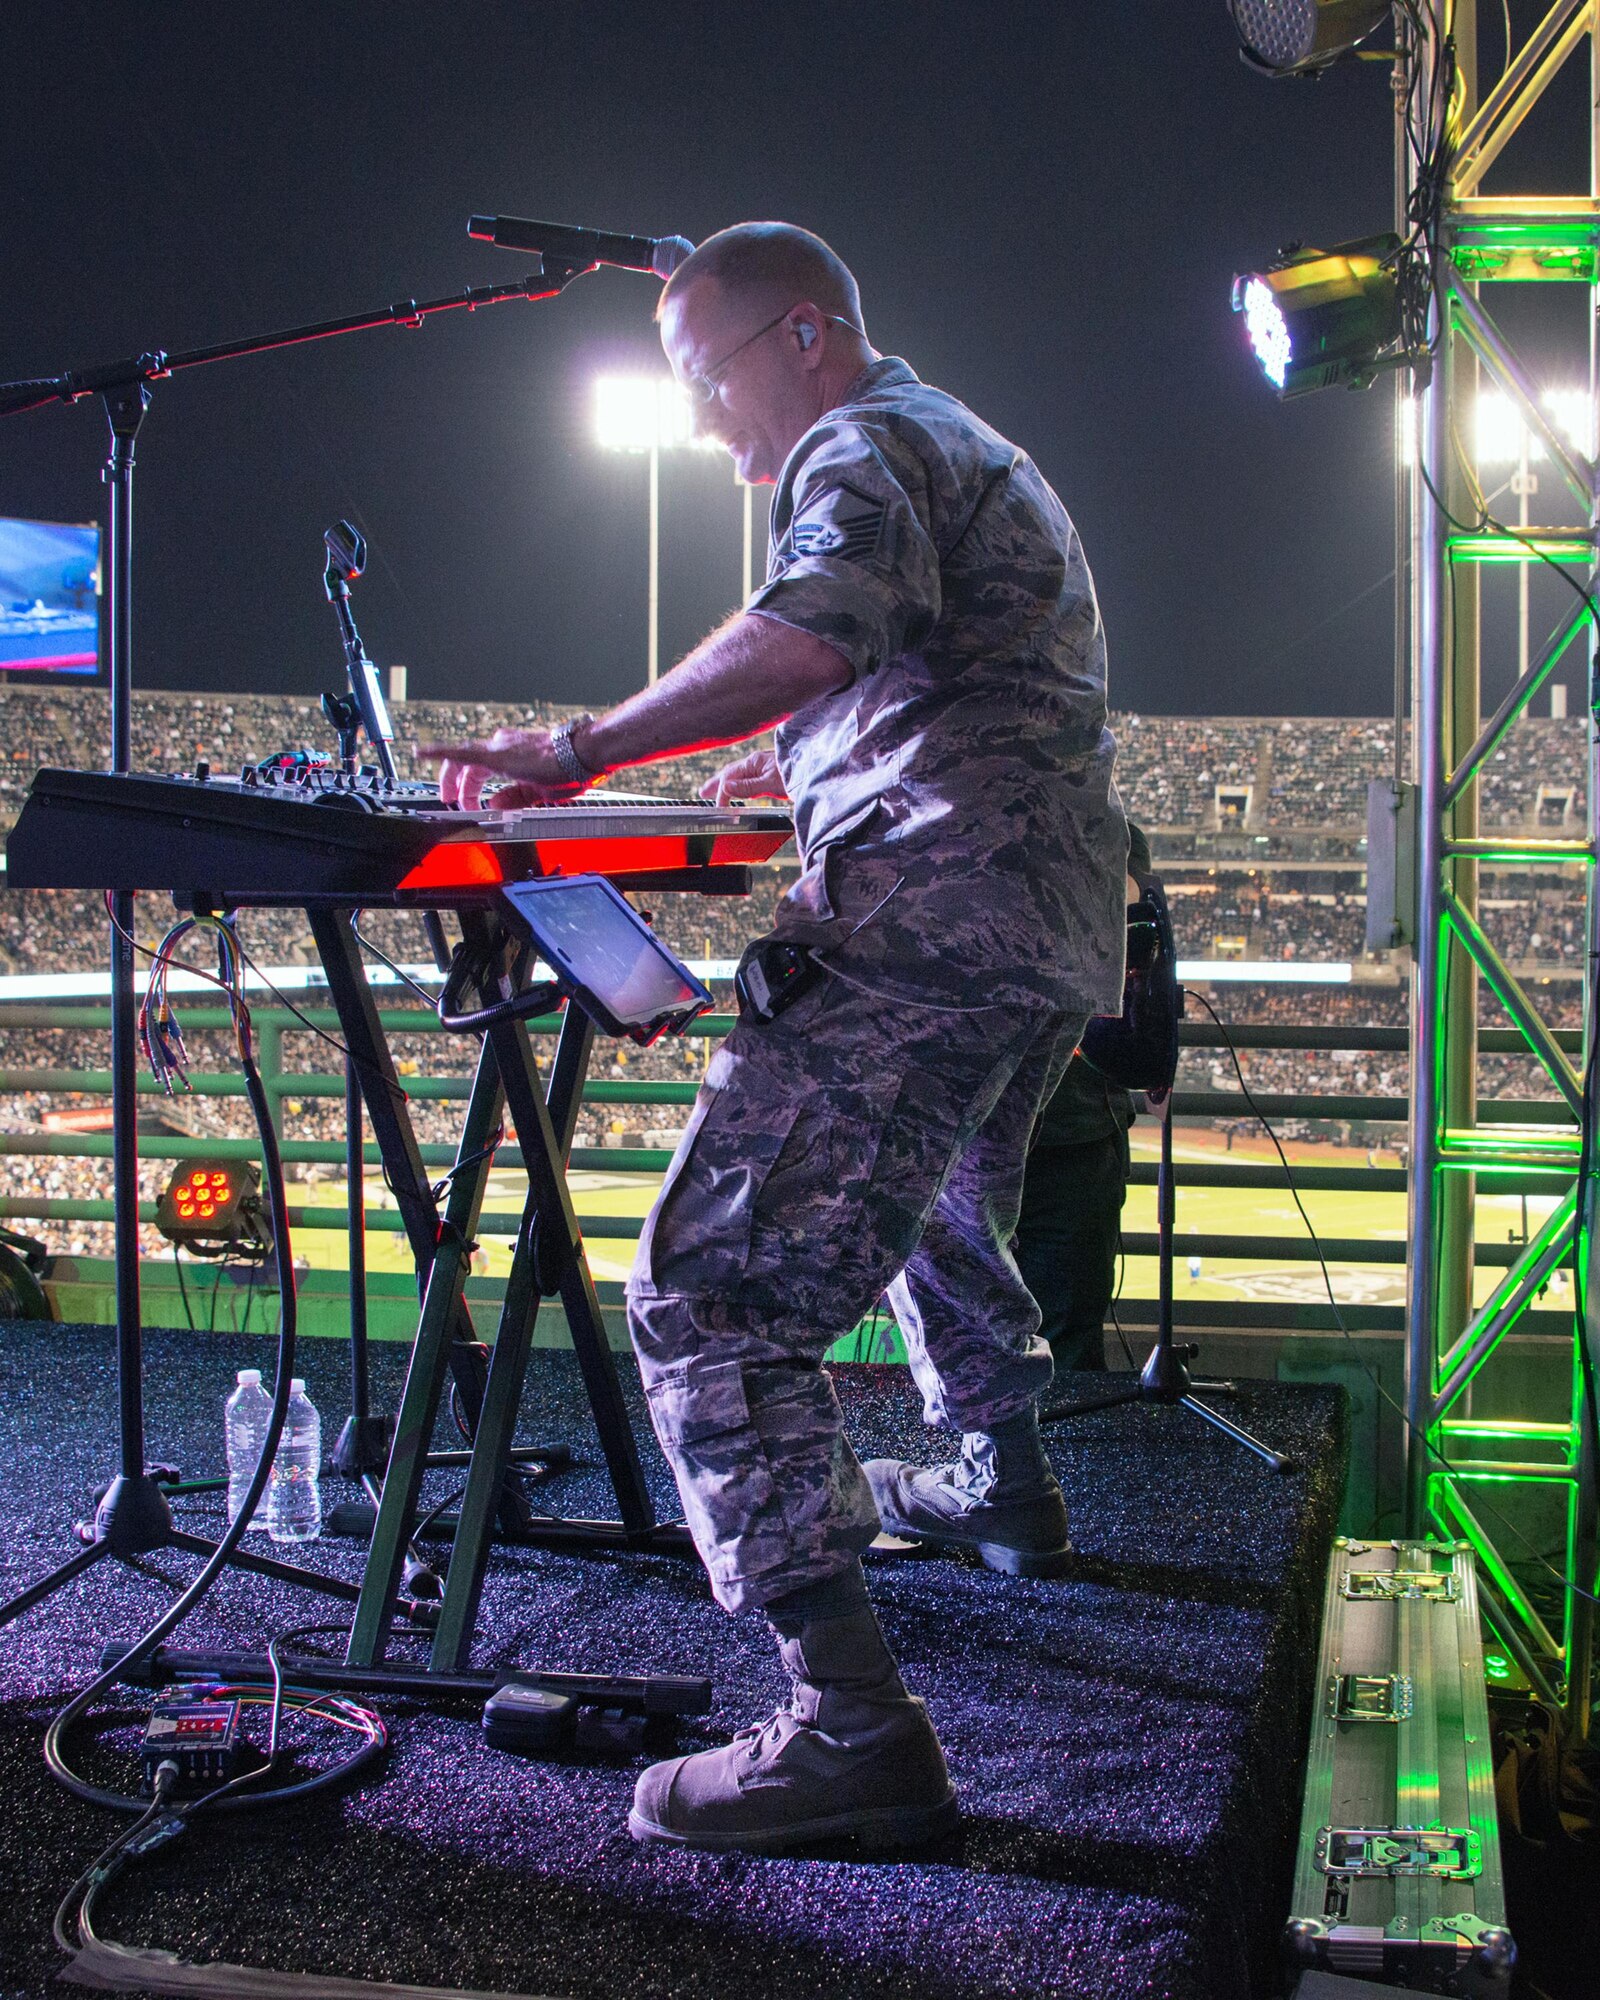 Master Sgt. Andrew Benton, Air Force Band of the Golden West, performs during the band’s halftime show at the Oakland Raiders Salute to Service game against the Denver Broncos at the Oakland Coliseum in Oakland Calif., Nov. 6, 2016. The band is stationed at Travis Air Force Base, Calif., and performed to a live audience of more than 54,000 fans. The band’s performing groups advance Air Mobility Command and global Air Force missions by providing professional musical products and services for official military, recruiting and community relations events. (U.S. Air Force photo/Louis Briscese)